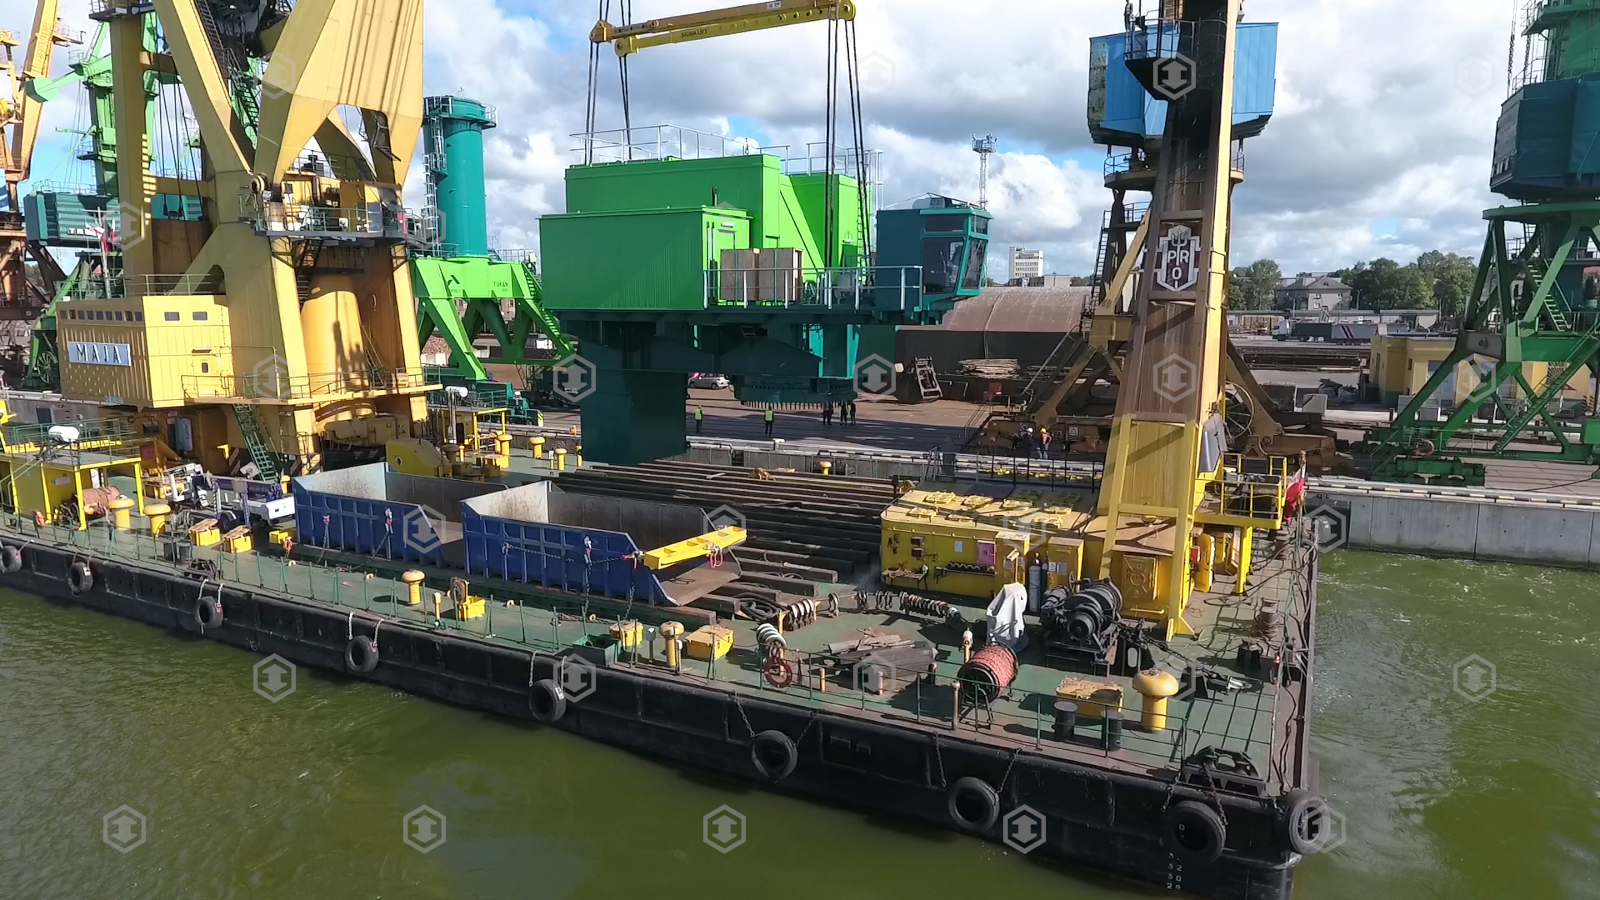 Assembly and installation of TUKAN gantry cranes